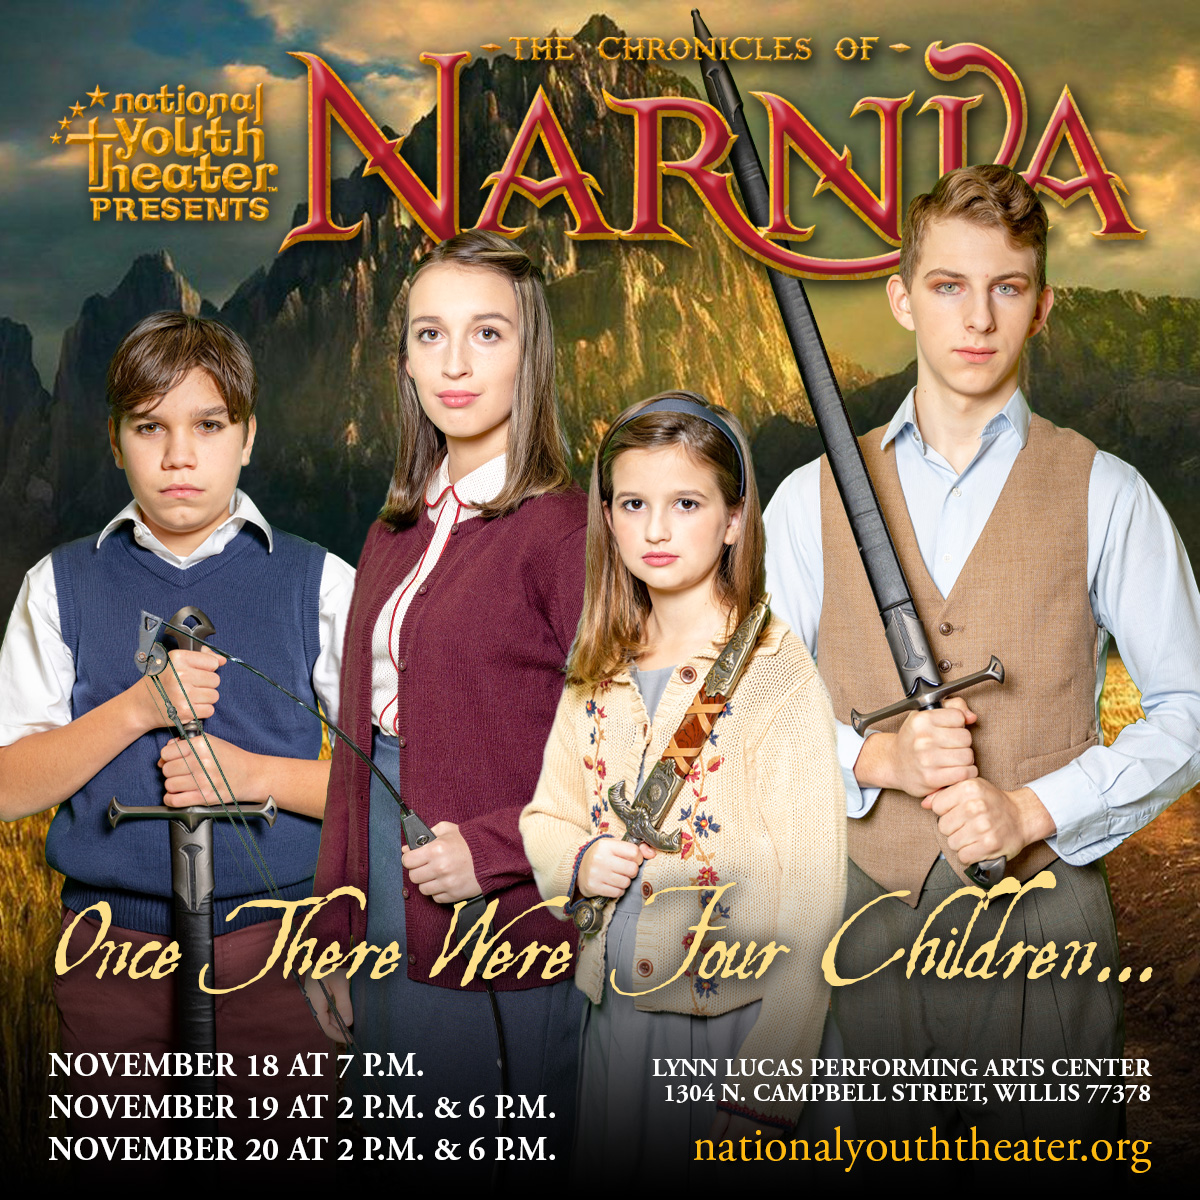 Morgantown's Narnia the Musical: Come for the lion, stay for magic